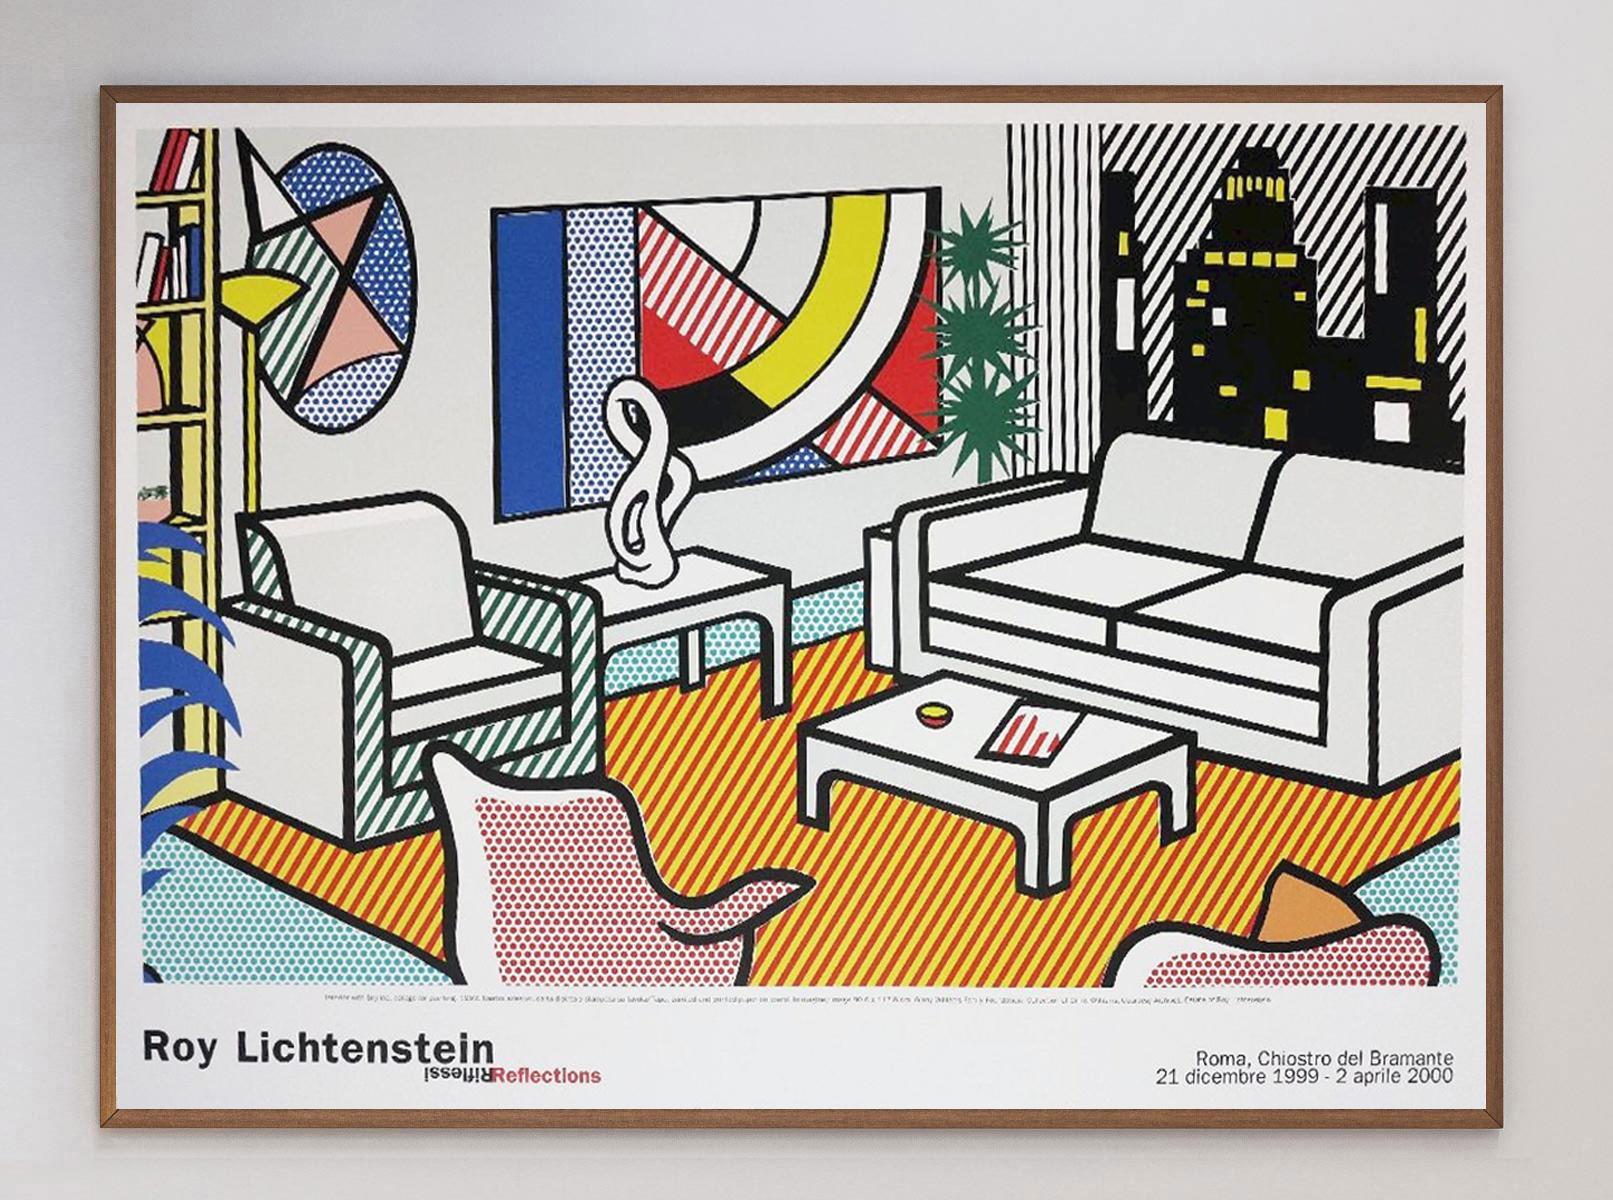 A beautiful and rare piece, this poster was produced for Roy Lichtenstein's exhibition at the Chiostro del Bramante in Rome, Italy. The exhibition was held between December 1999 and April 2000 and this promotional poster features his 1992 painting